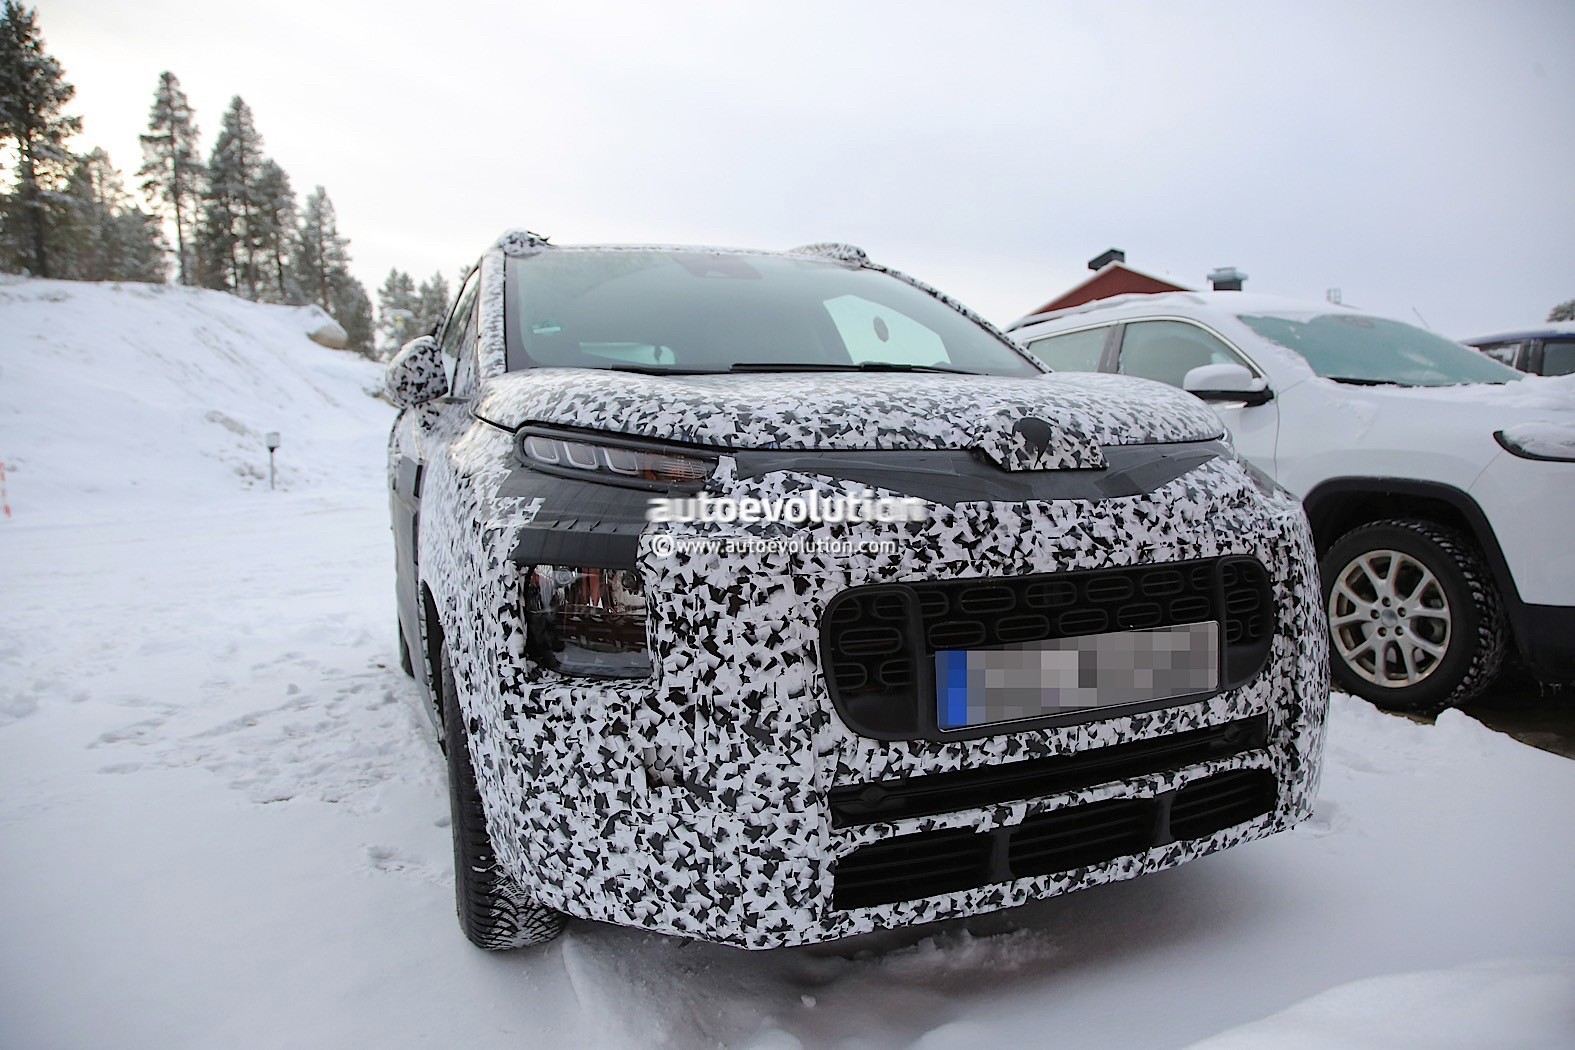 2018 Citroen C3 Picasso Makes a Snowy Appearance Before Official ...